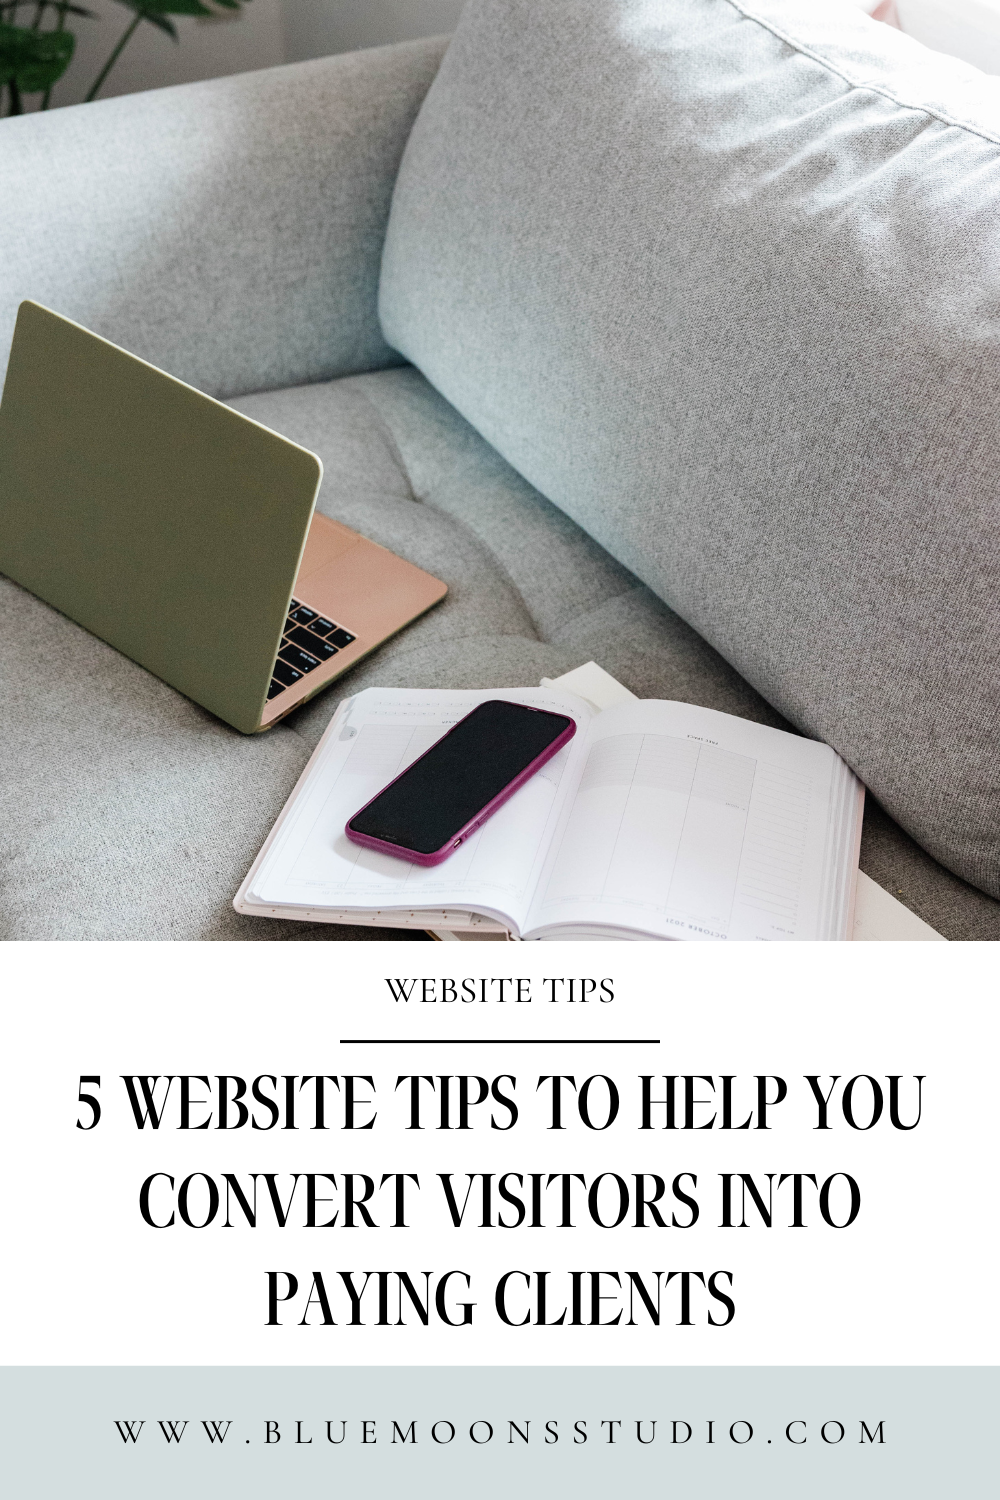 High_coverting_website_tips.png